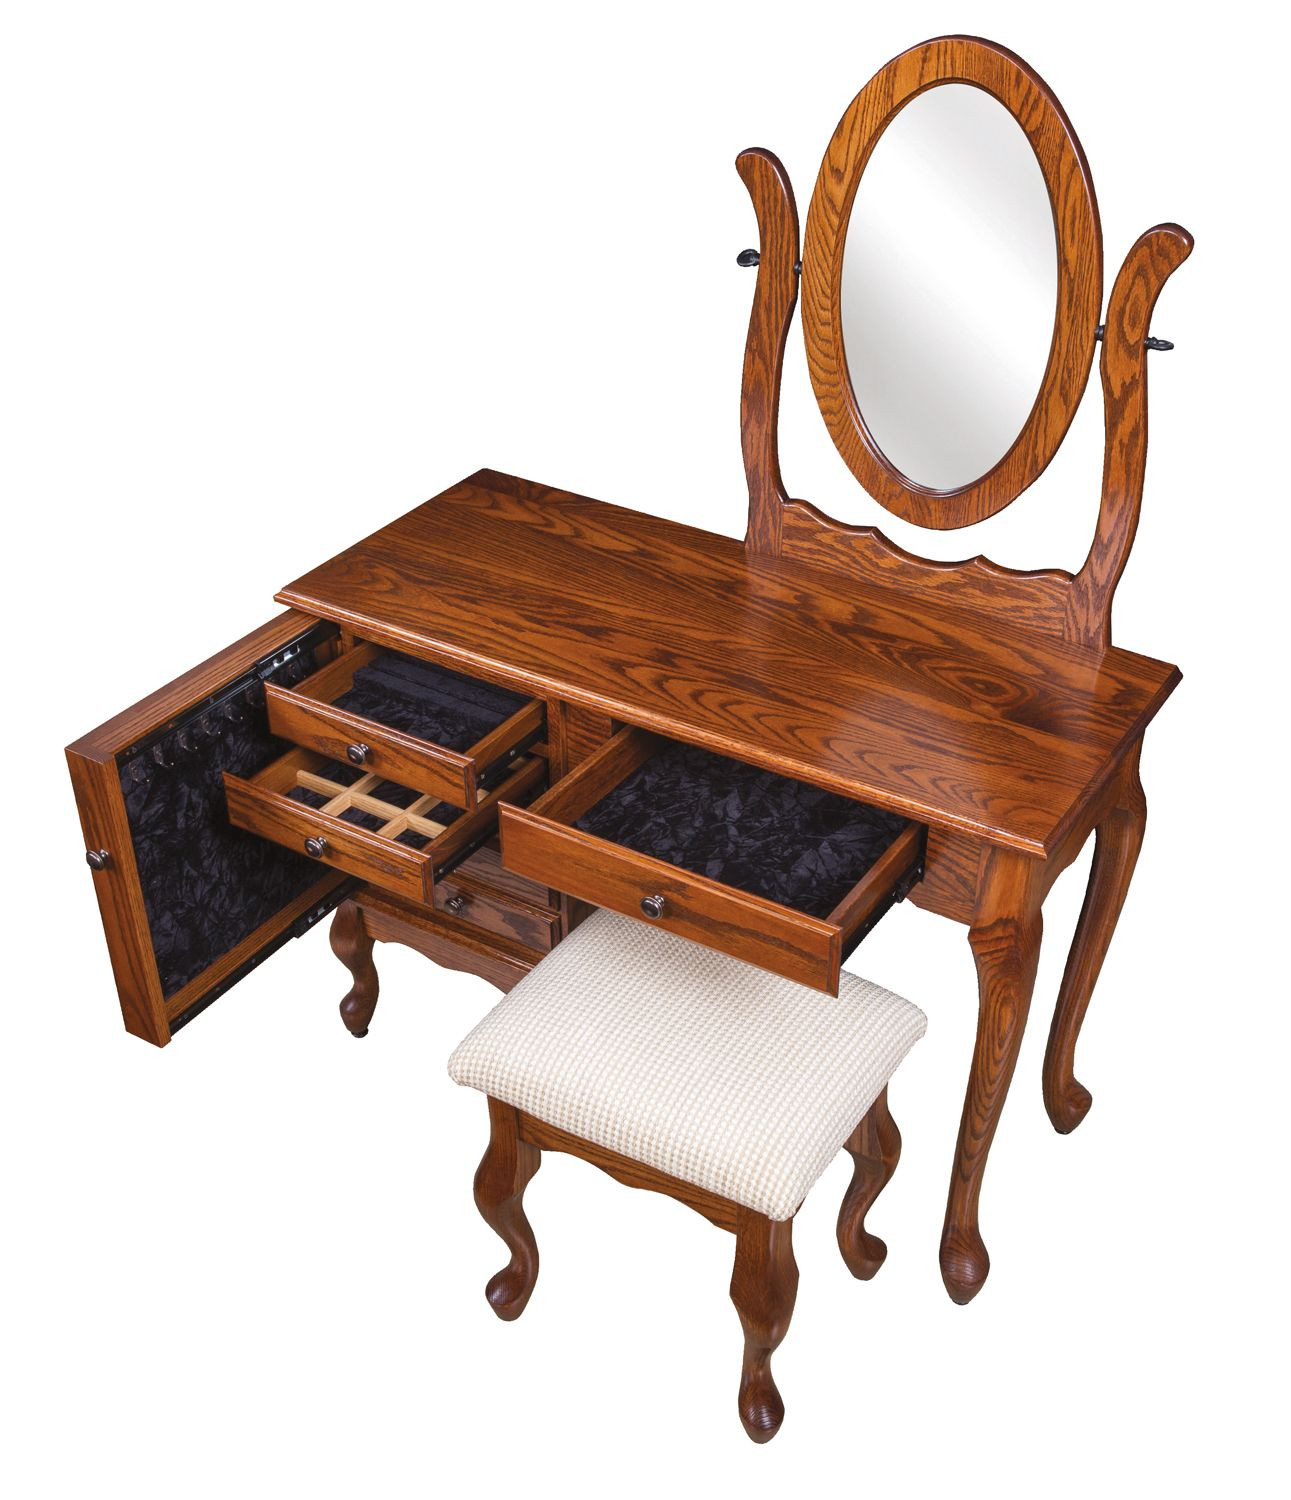 amish-queen-anne-jewelry-dressing-table.jpg